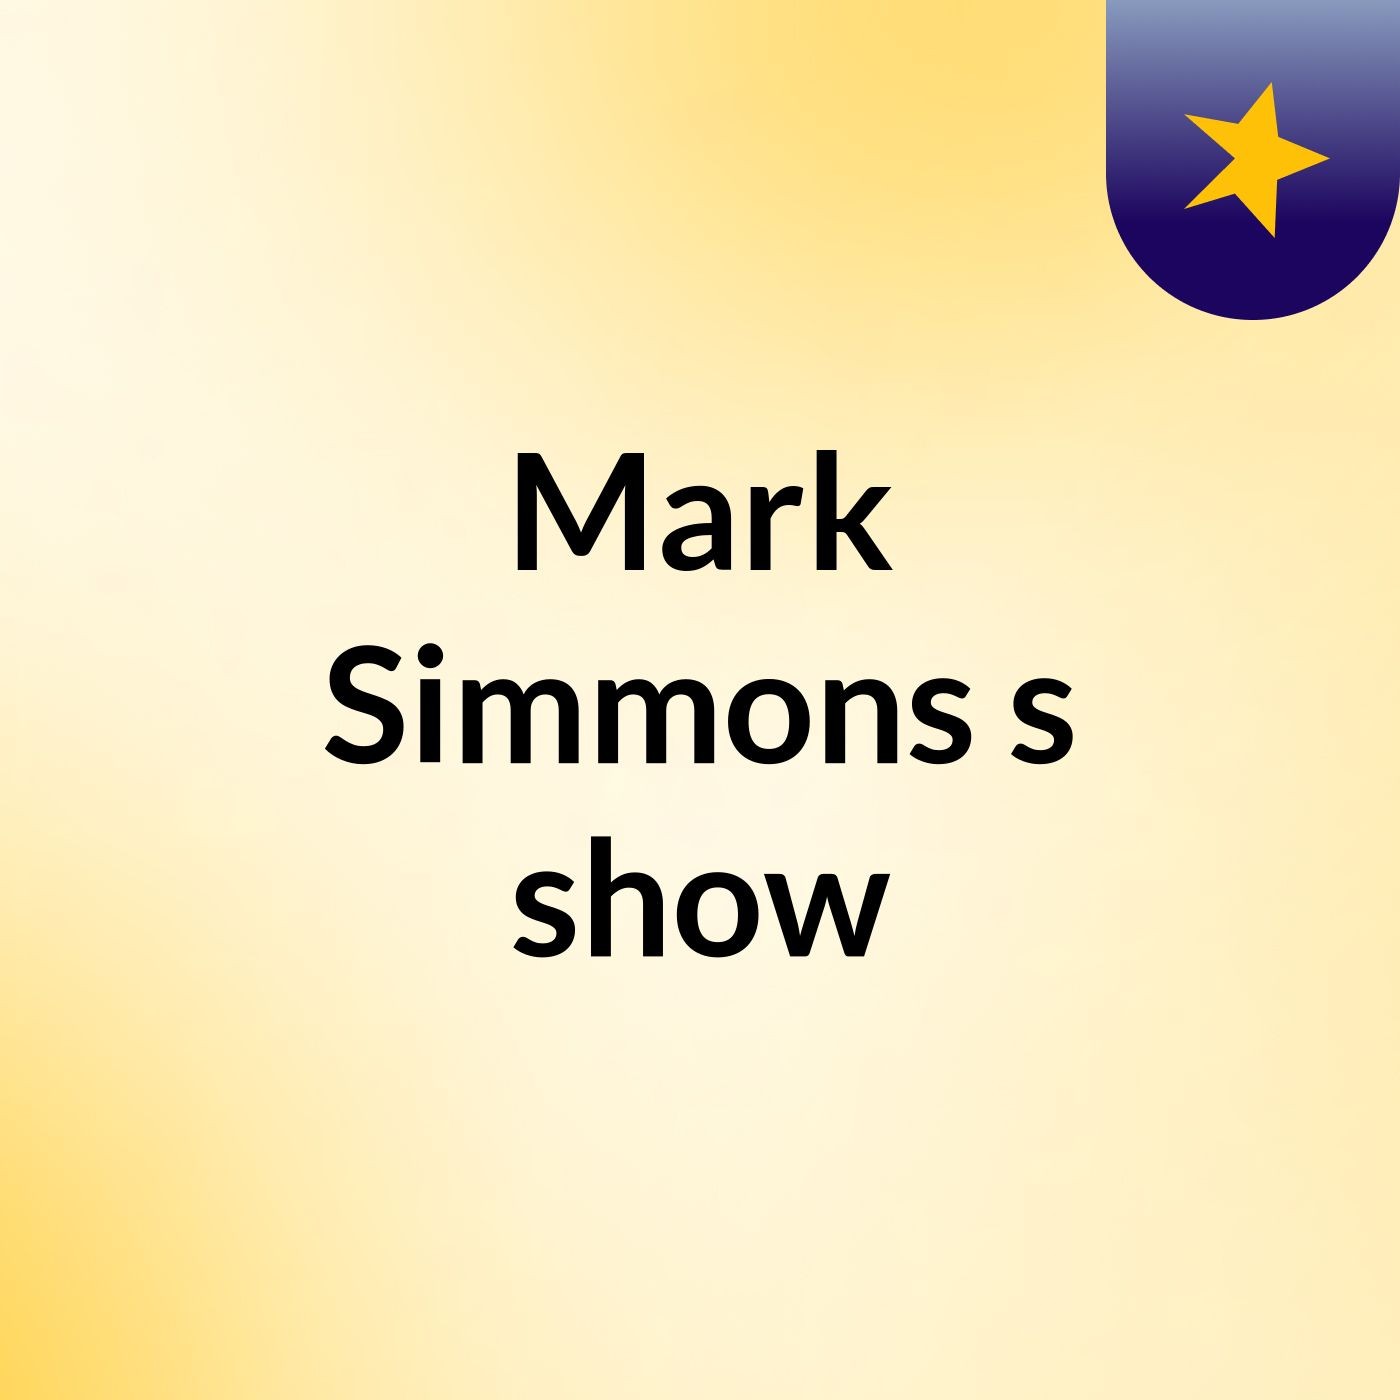 Episode 4 - Mark Simmons's show